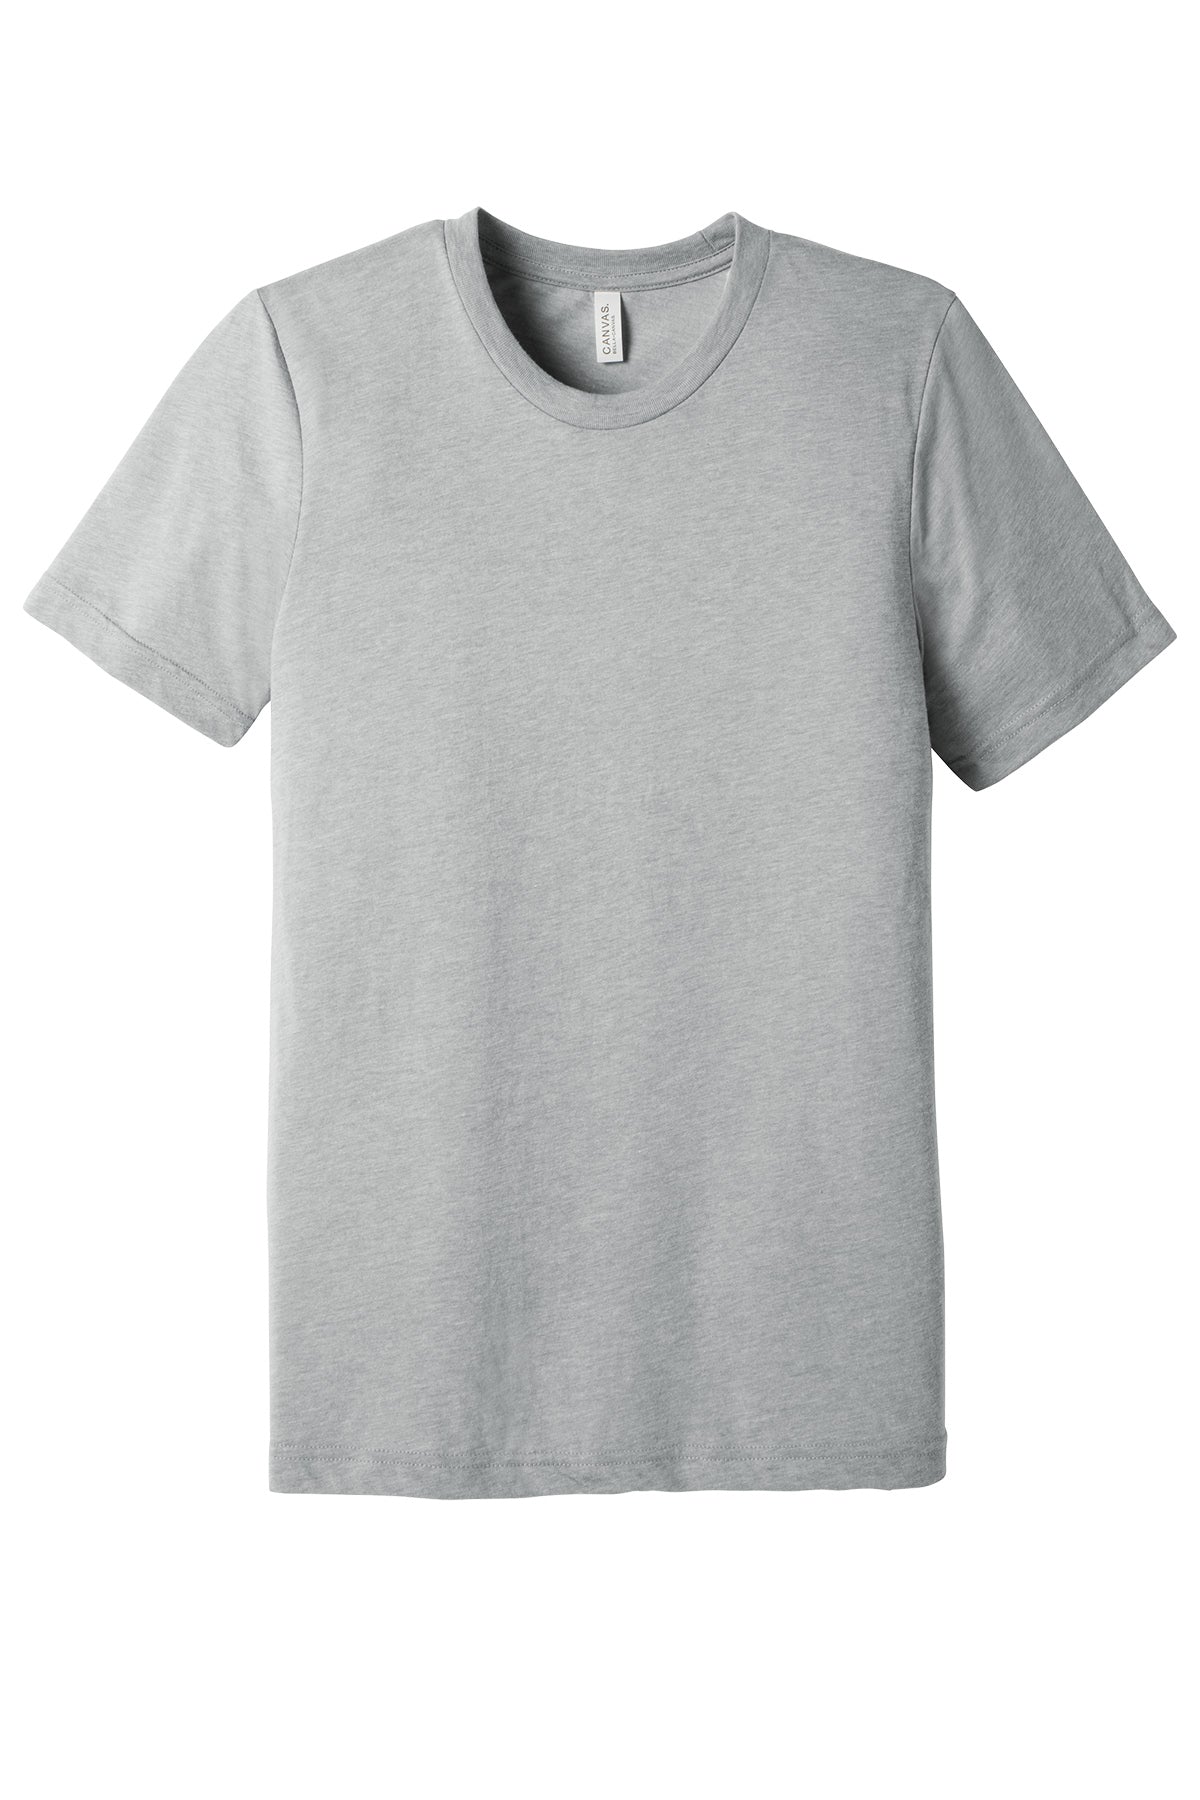 Bella+Canvas Bc3413 Adult T-Shirt Ad Small / Athletic Triblend